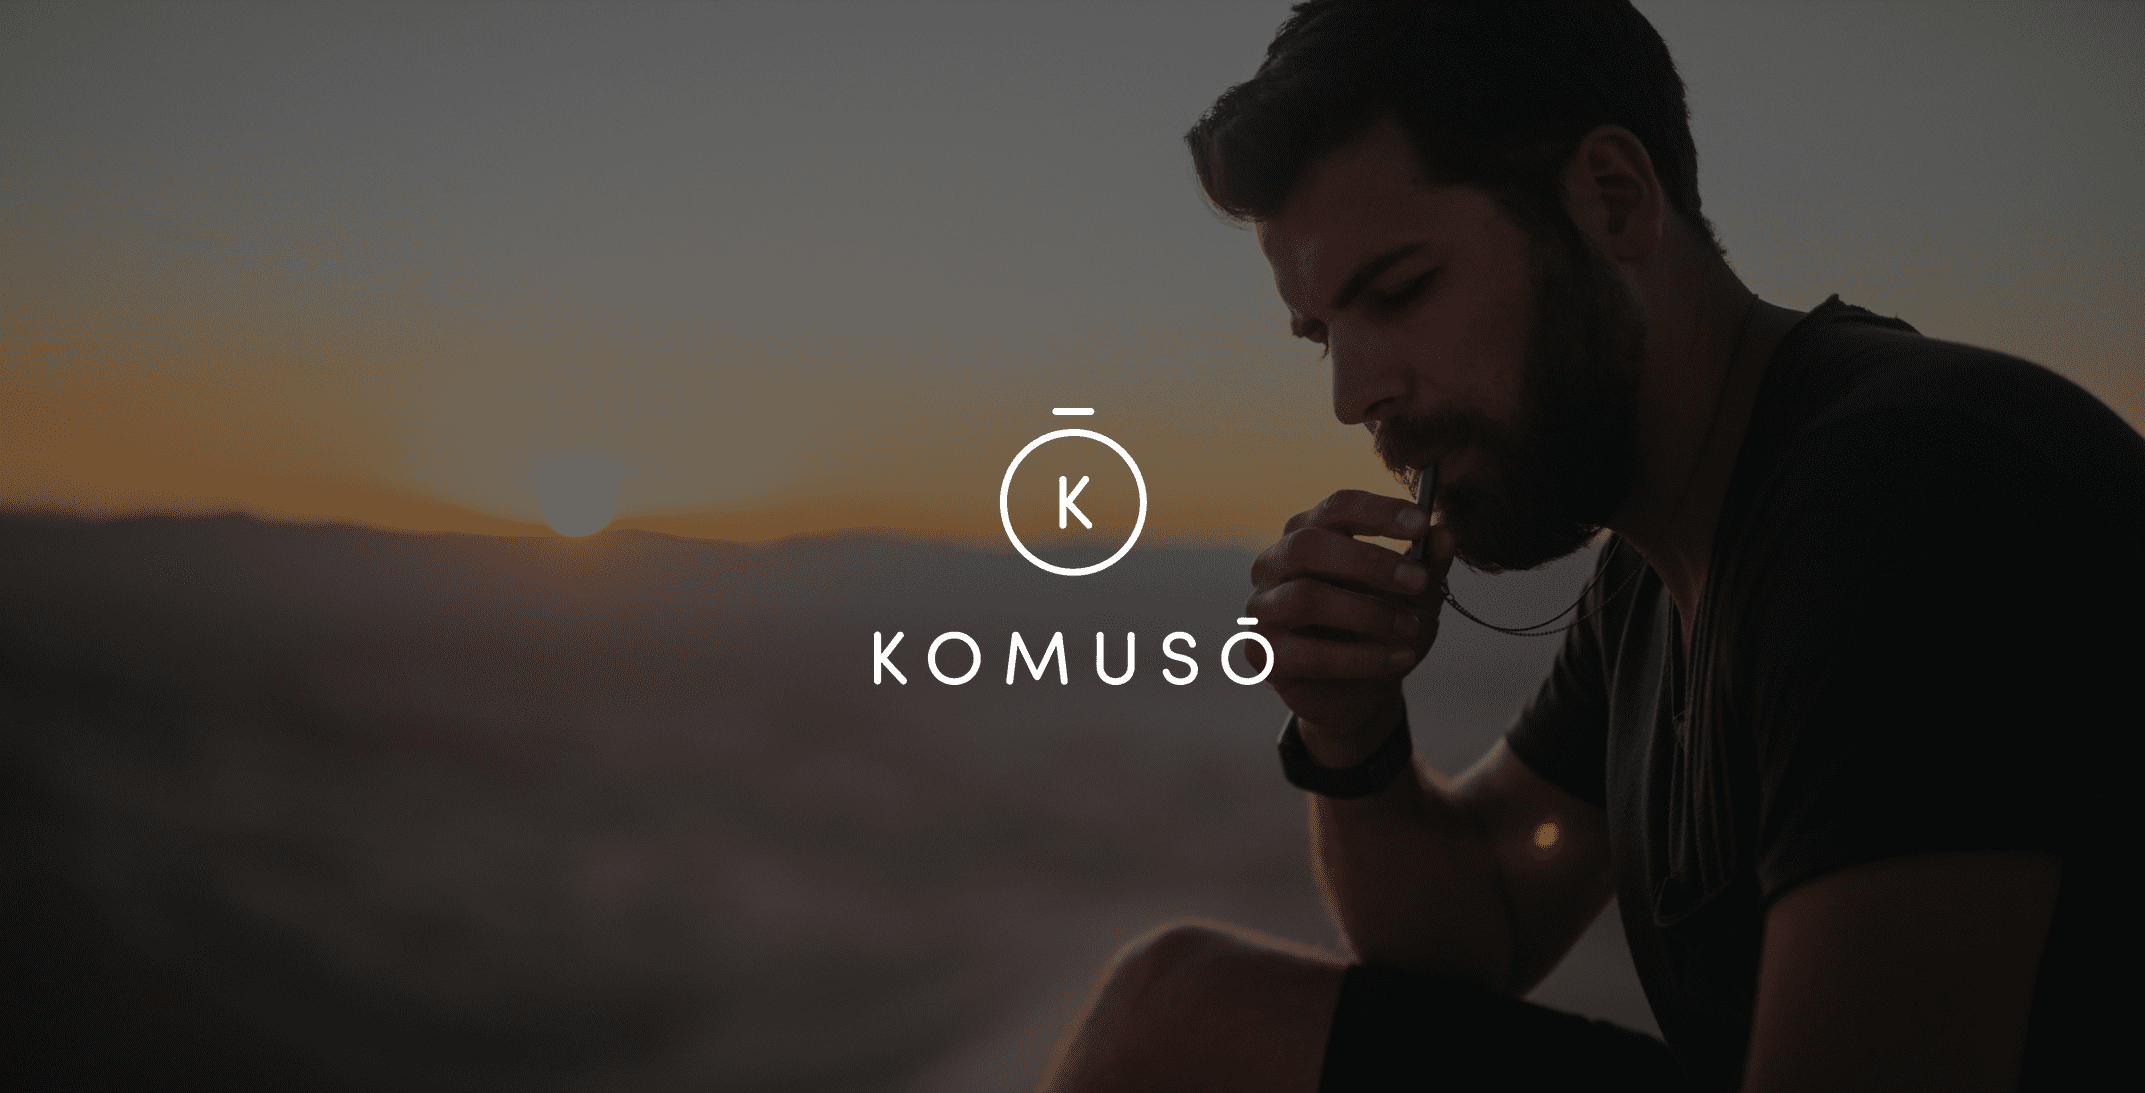 White Komuso logo with side profile backdrop of man with a beard and short hair blowing a whistle with a valley and the sun in the background